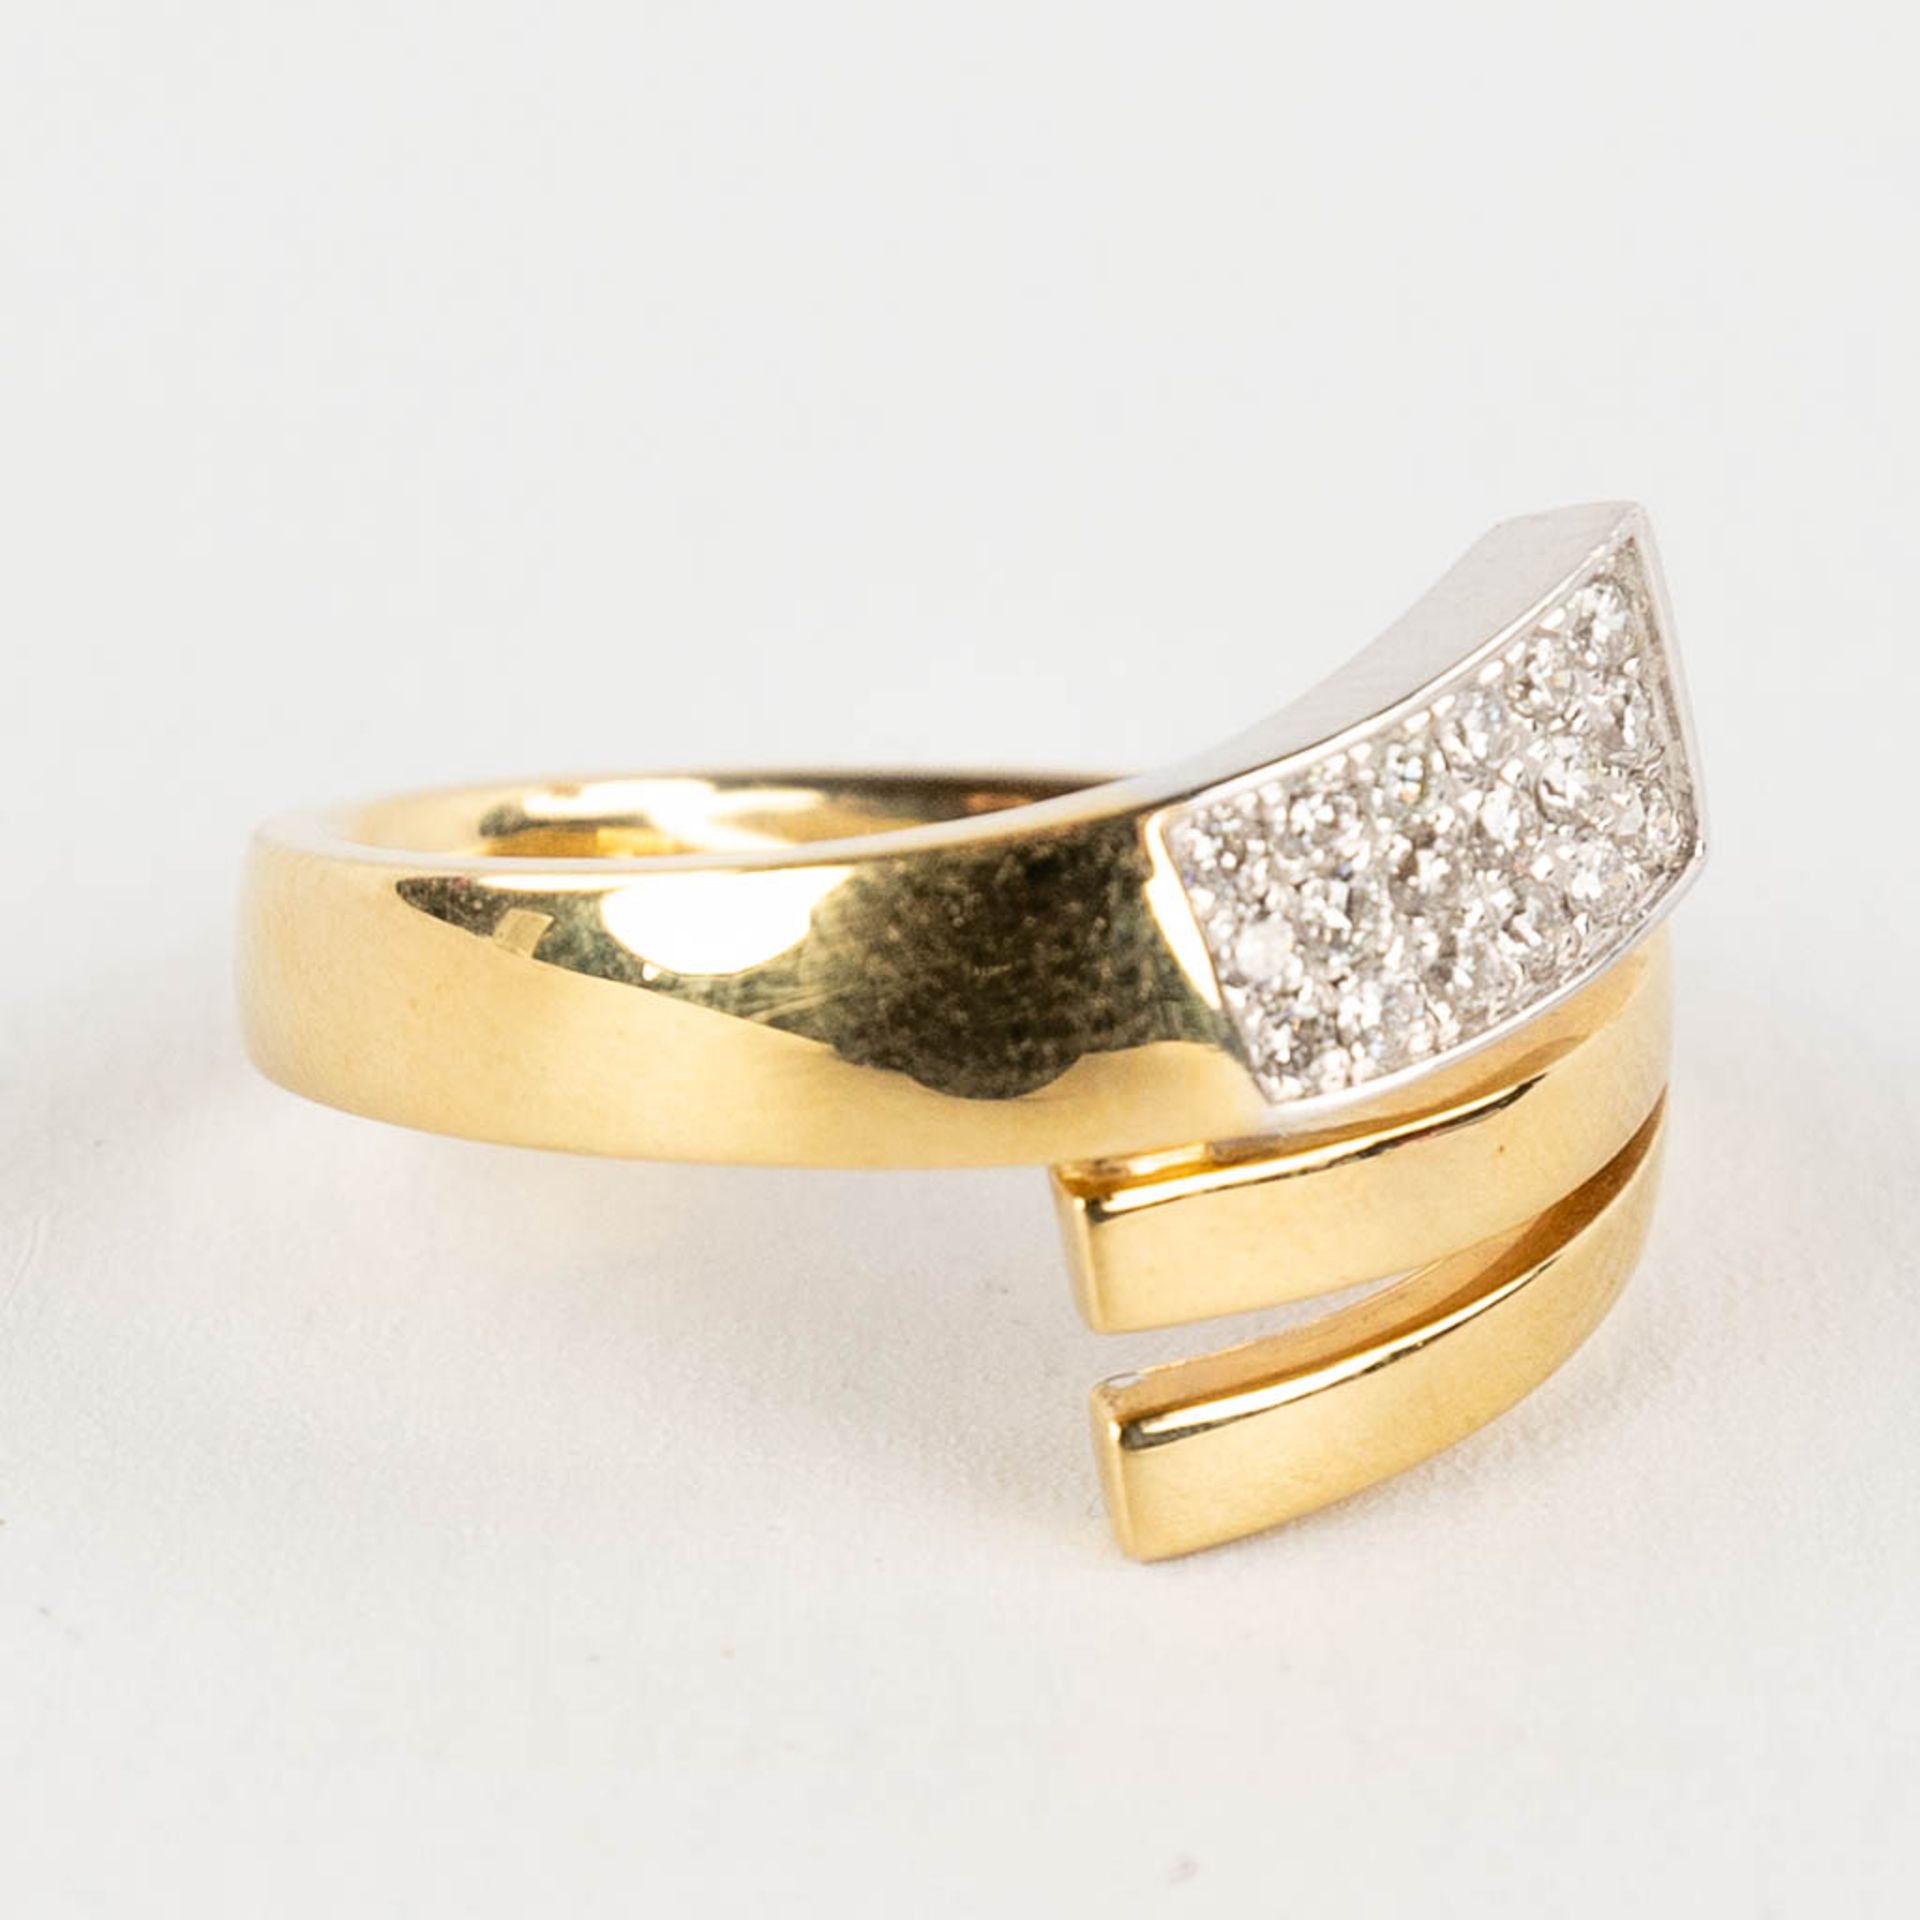 A ring, 18kt yellow gold with diamonds, appr. 0,42ct, ring size 55. - Image 3 of 11